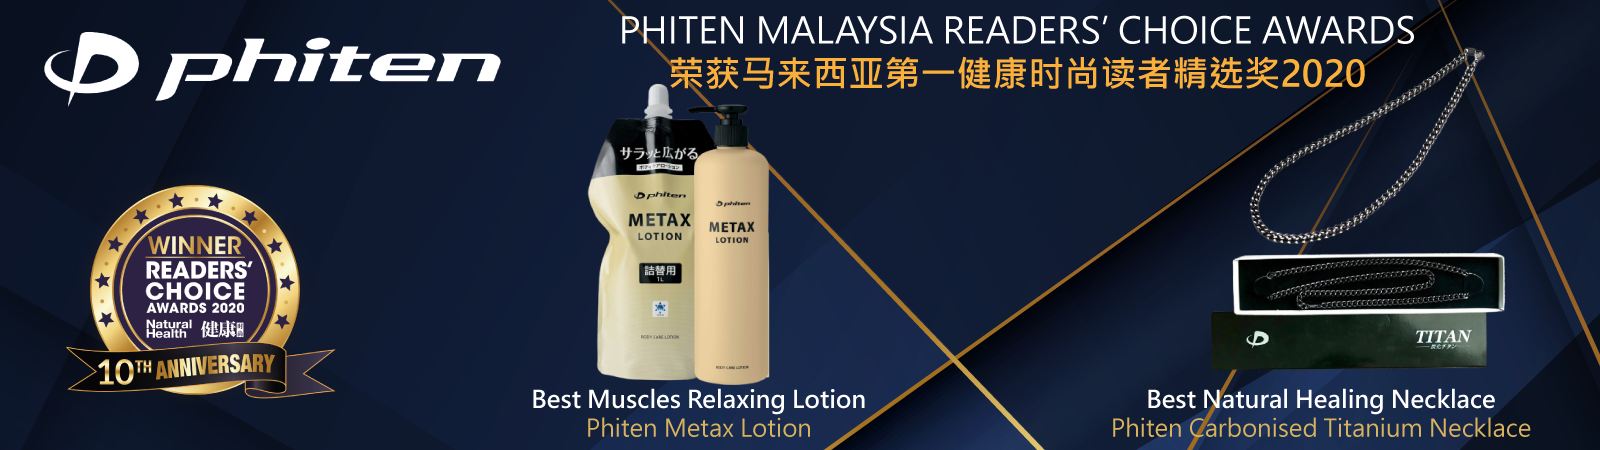 After a Long Day, it’s Time to Relax With Some Tender Loving Care: Phiten Metax Lotion